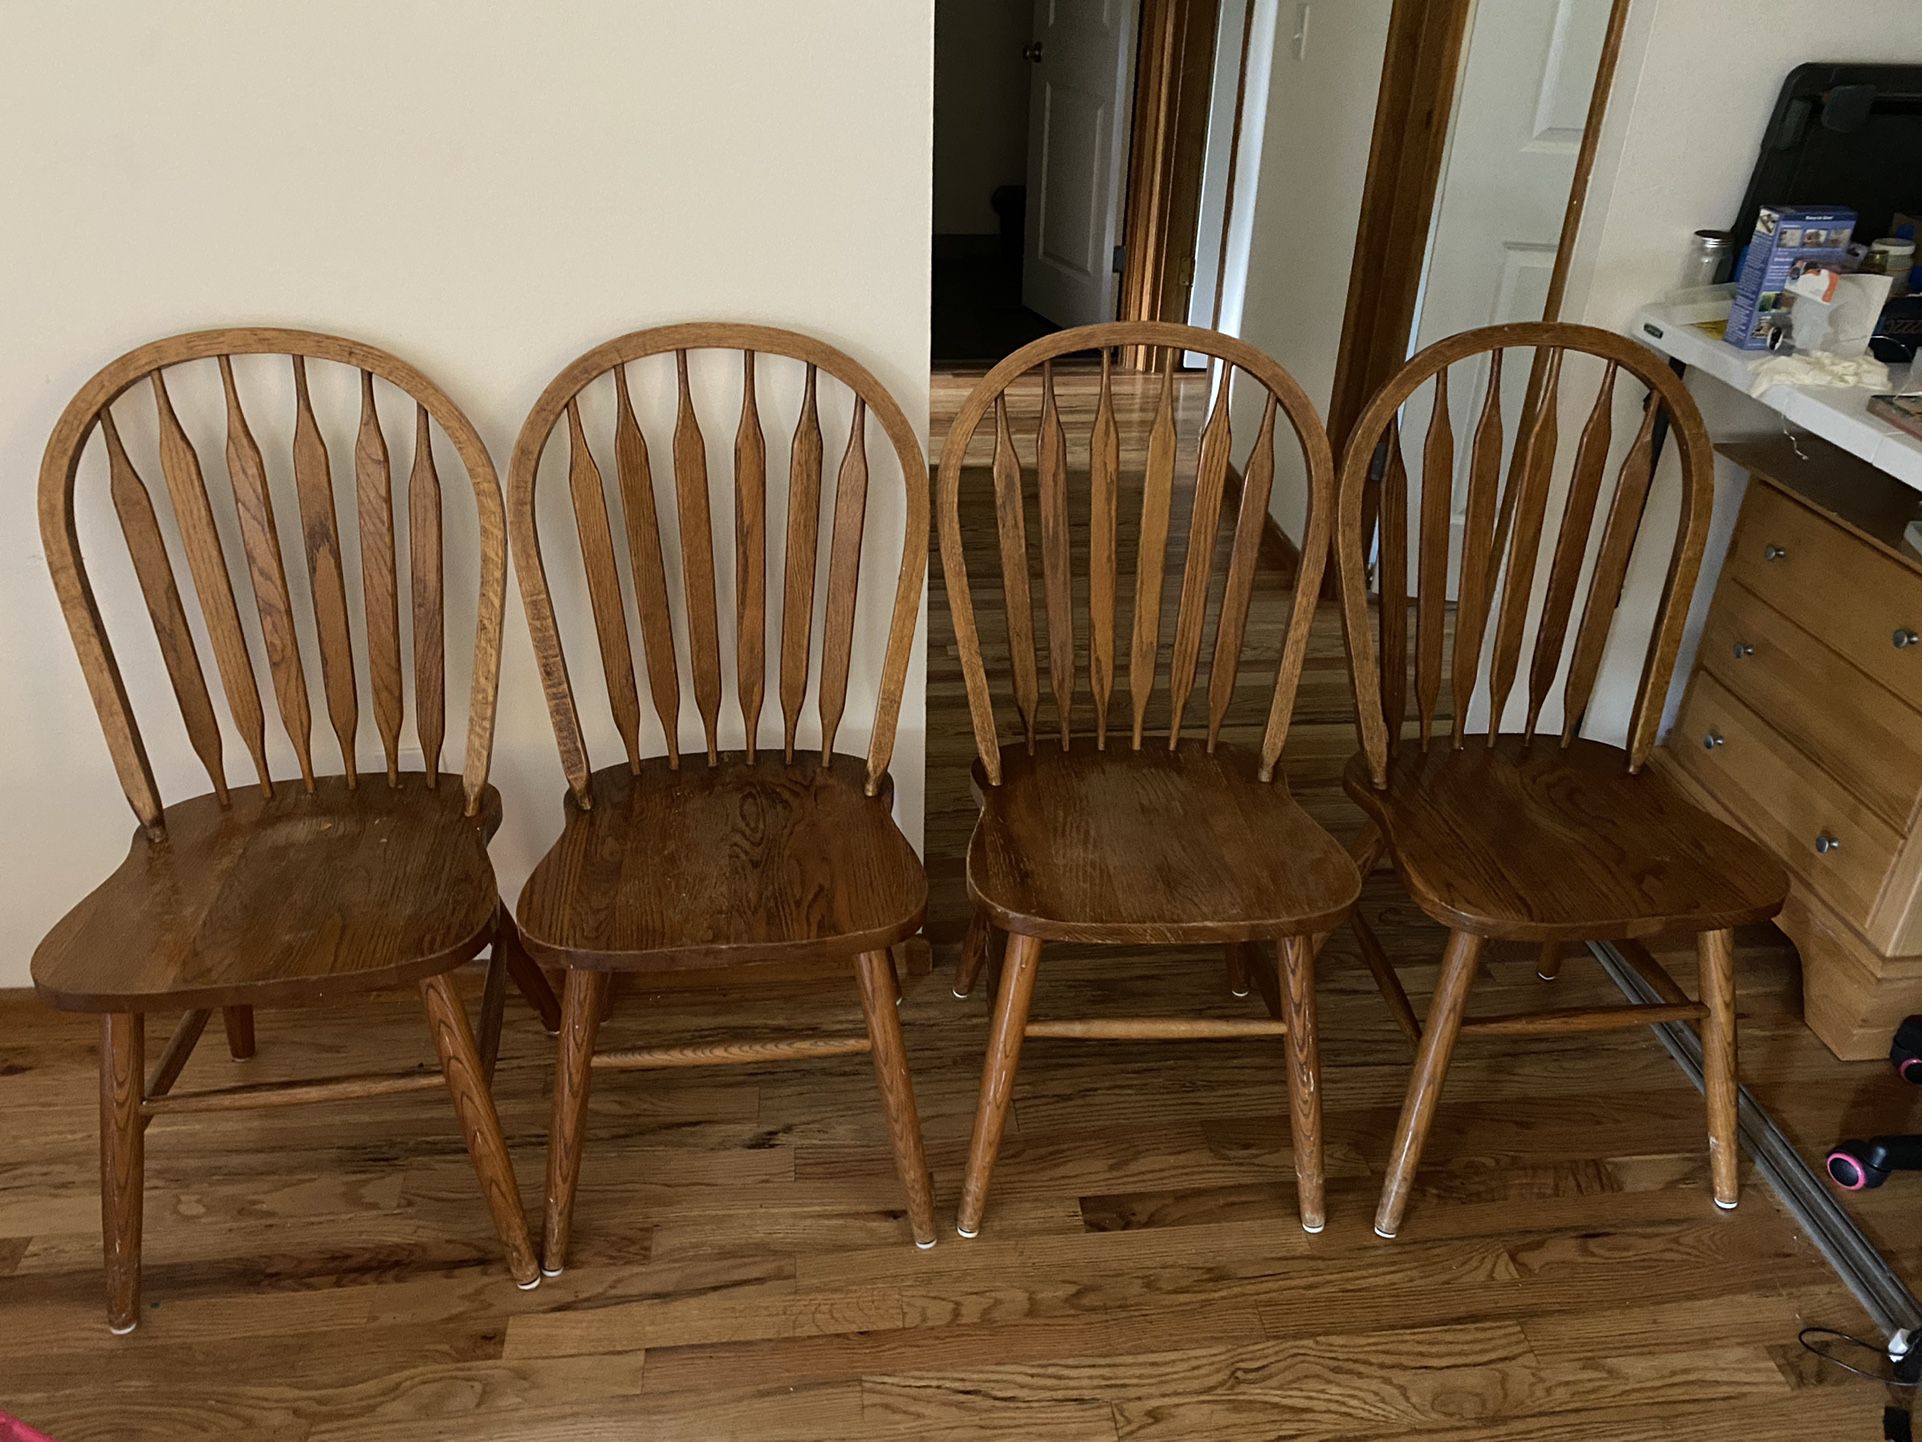 4 Matching Wooden Chairs